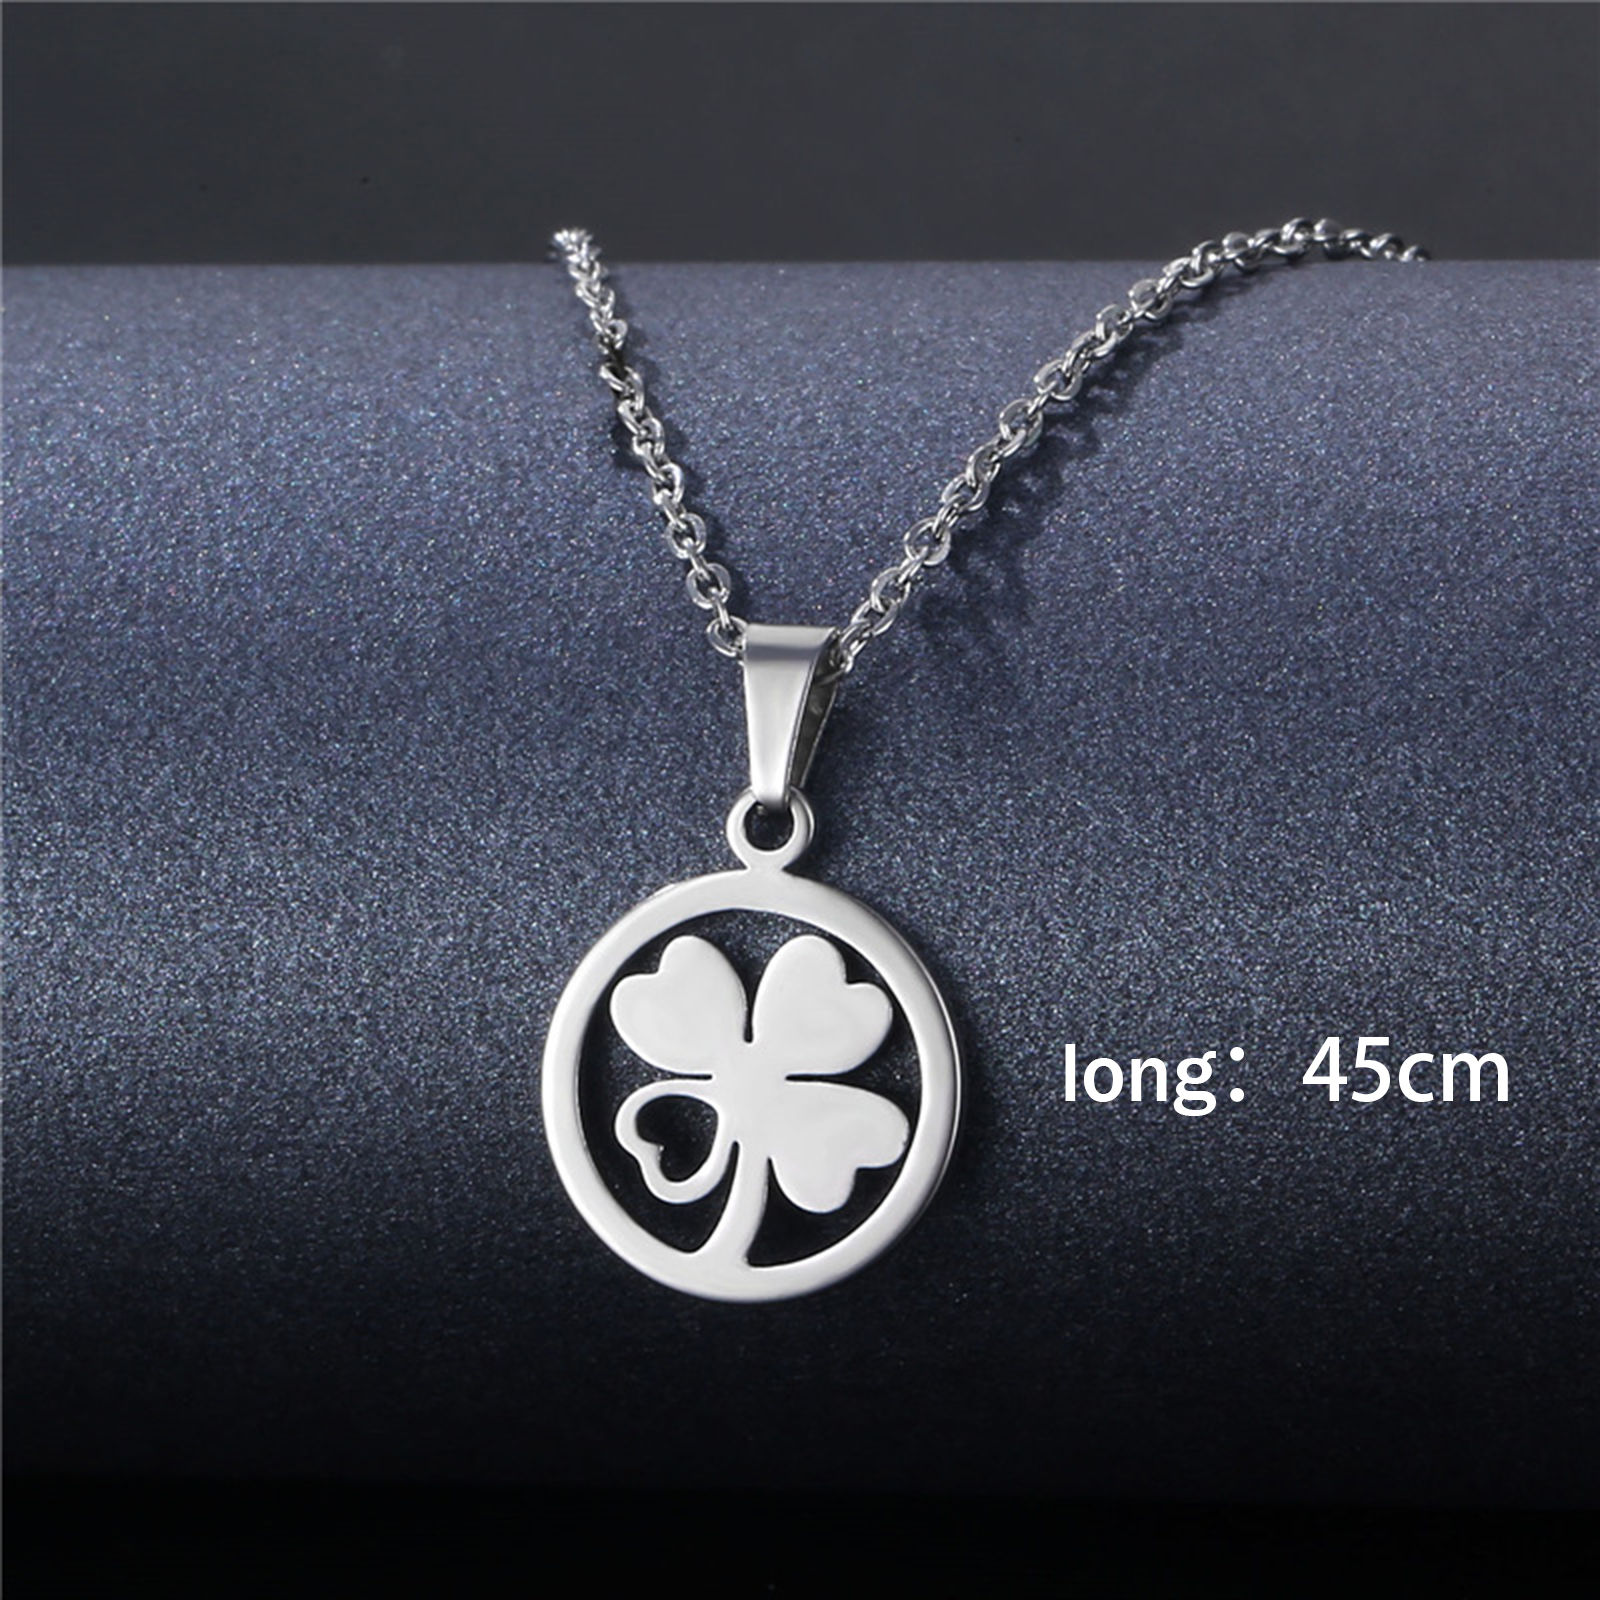 Picture of Stainless Steel Link Cable Chain Findings Necklace Silver Tone 45cm(17 6/8") long, 1 Piece